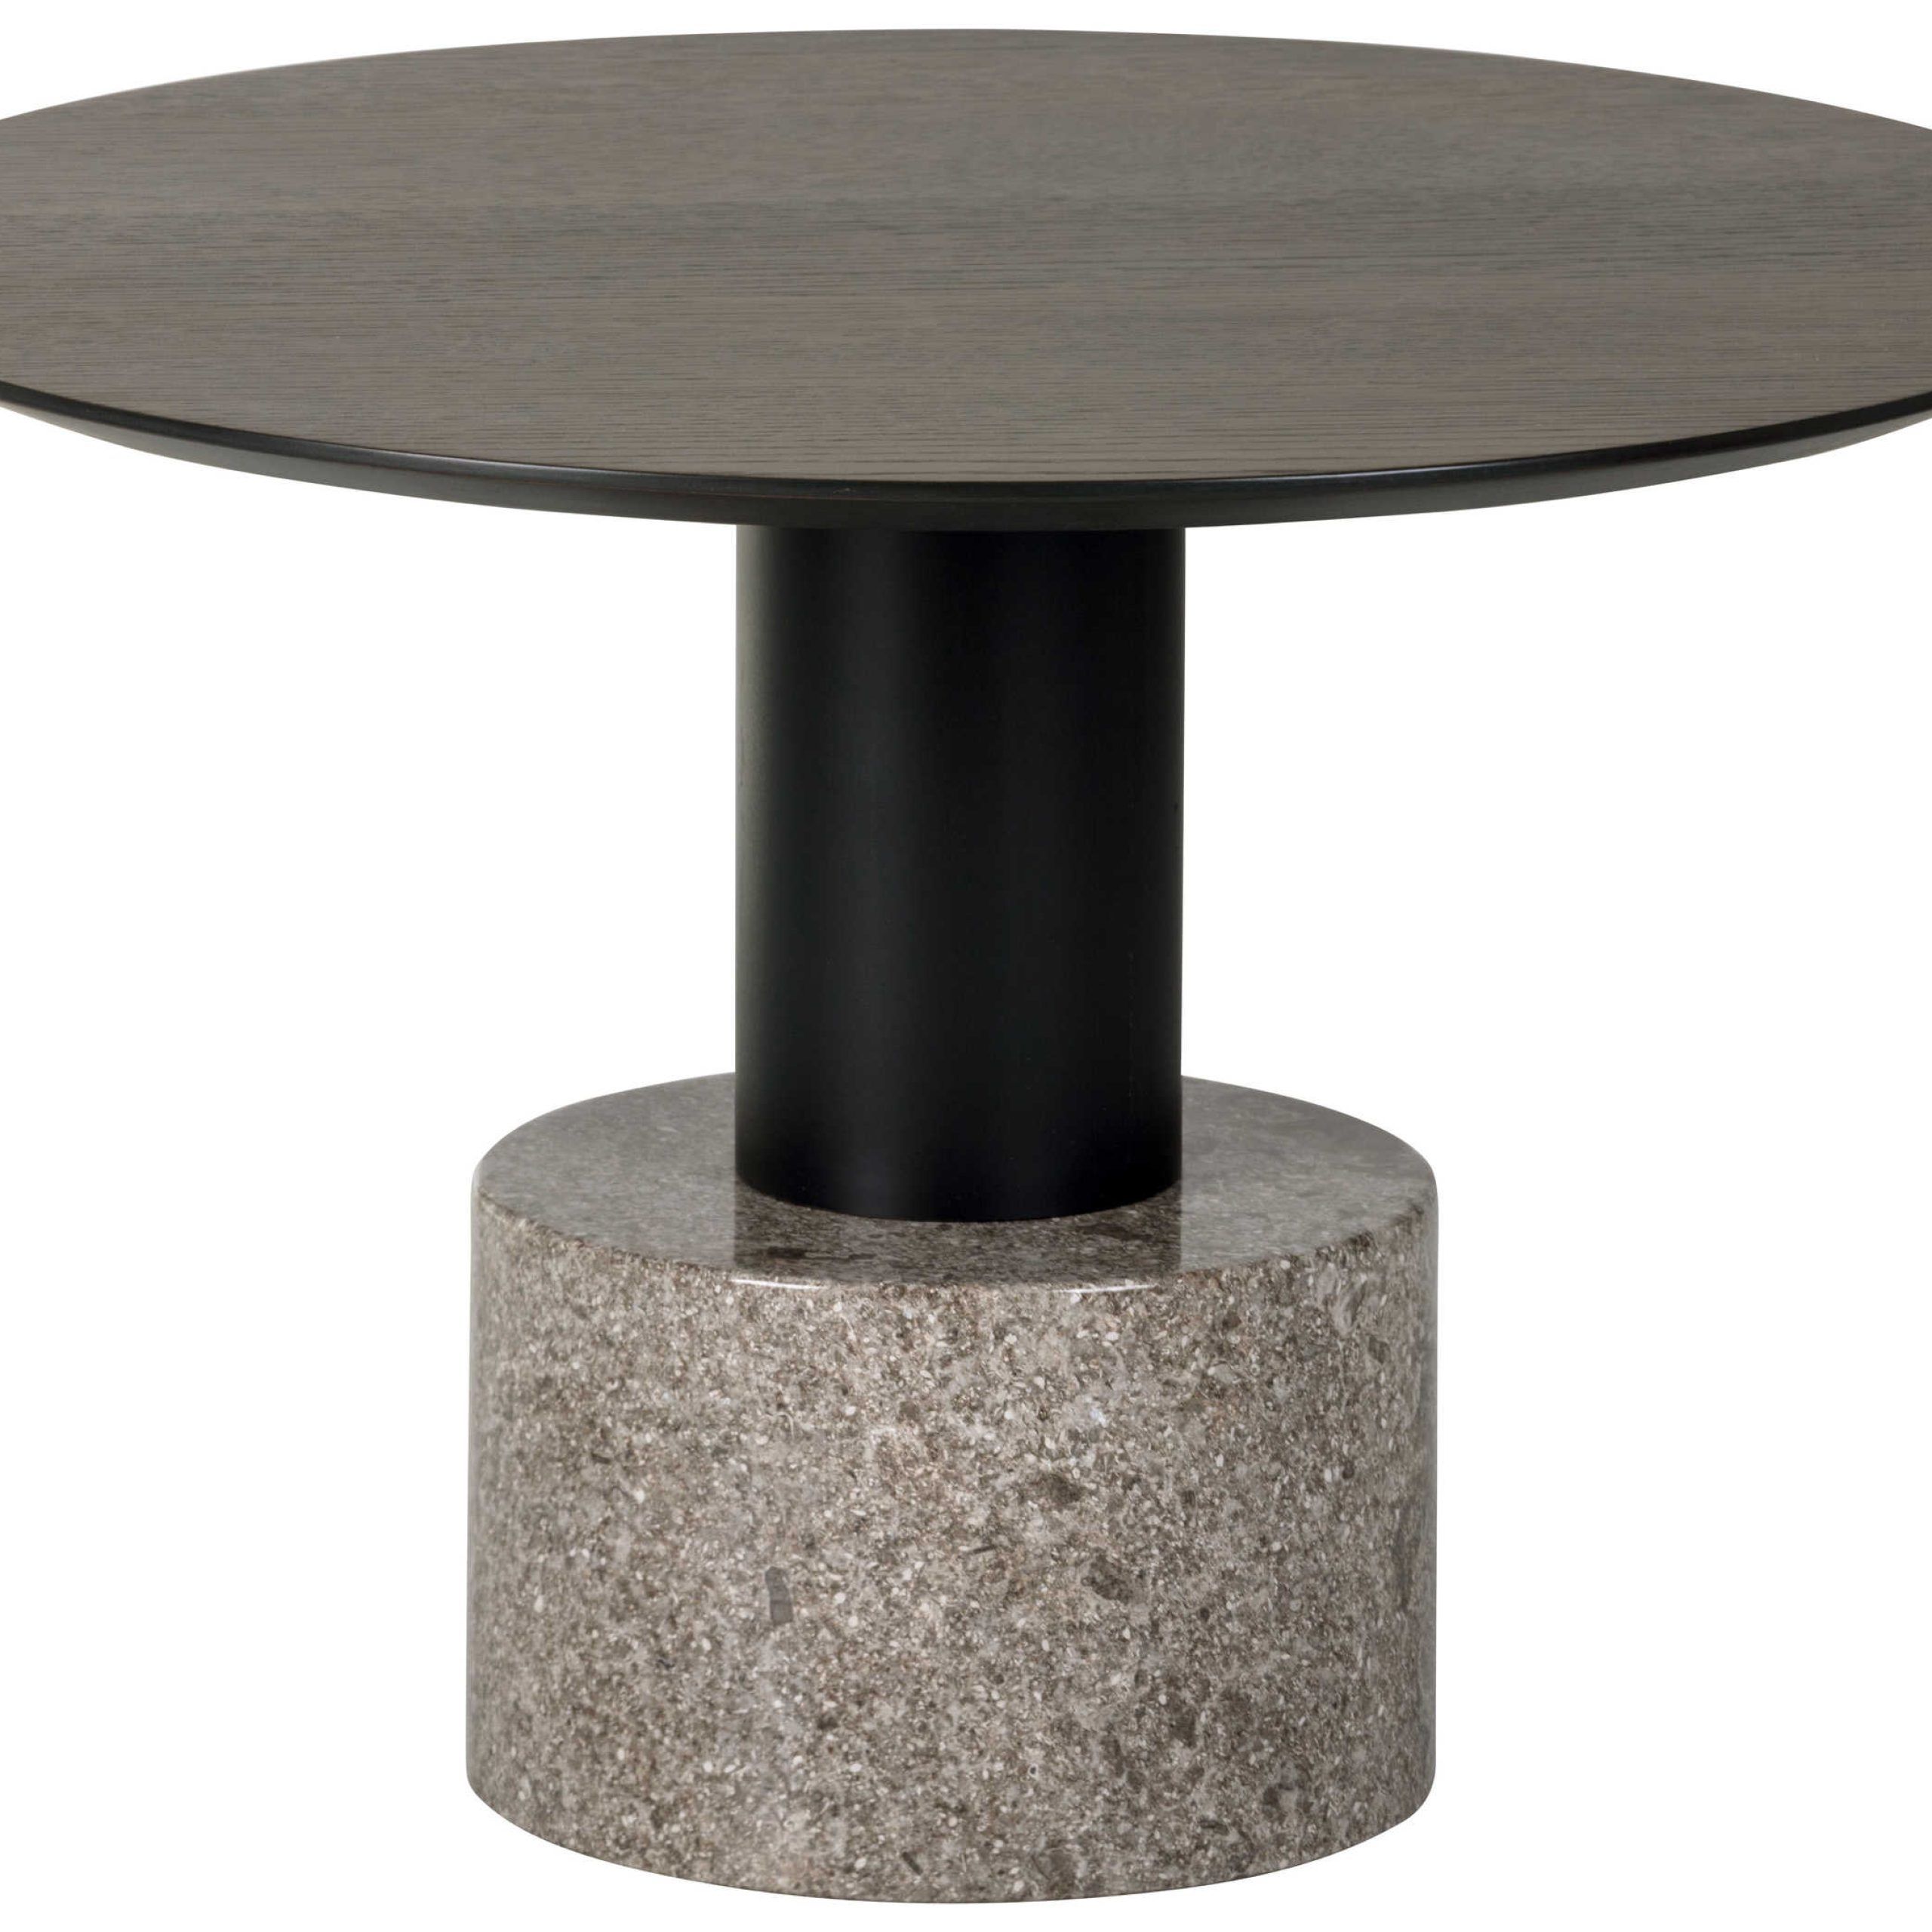 Spn104628 With Regard To Monaco Round Coffee Tables (View 5 of 10)